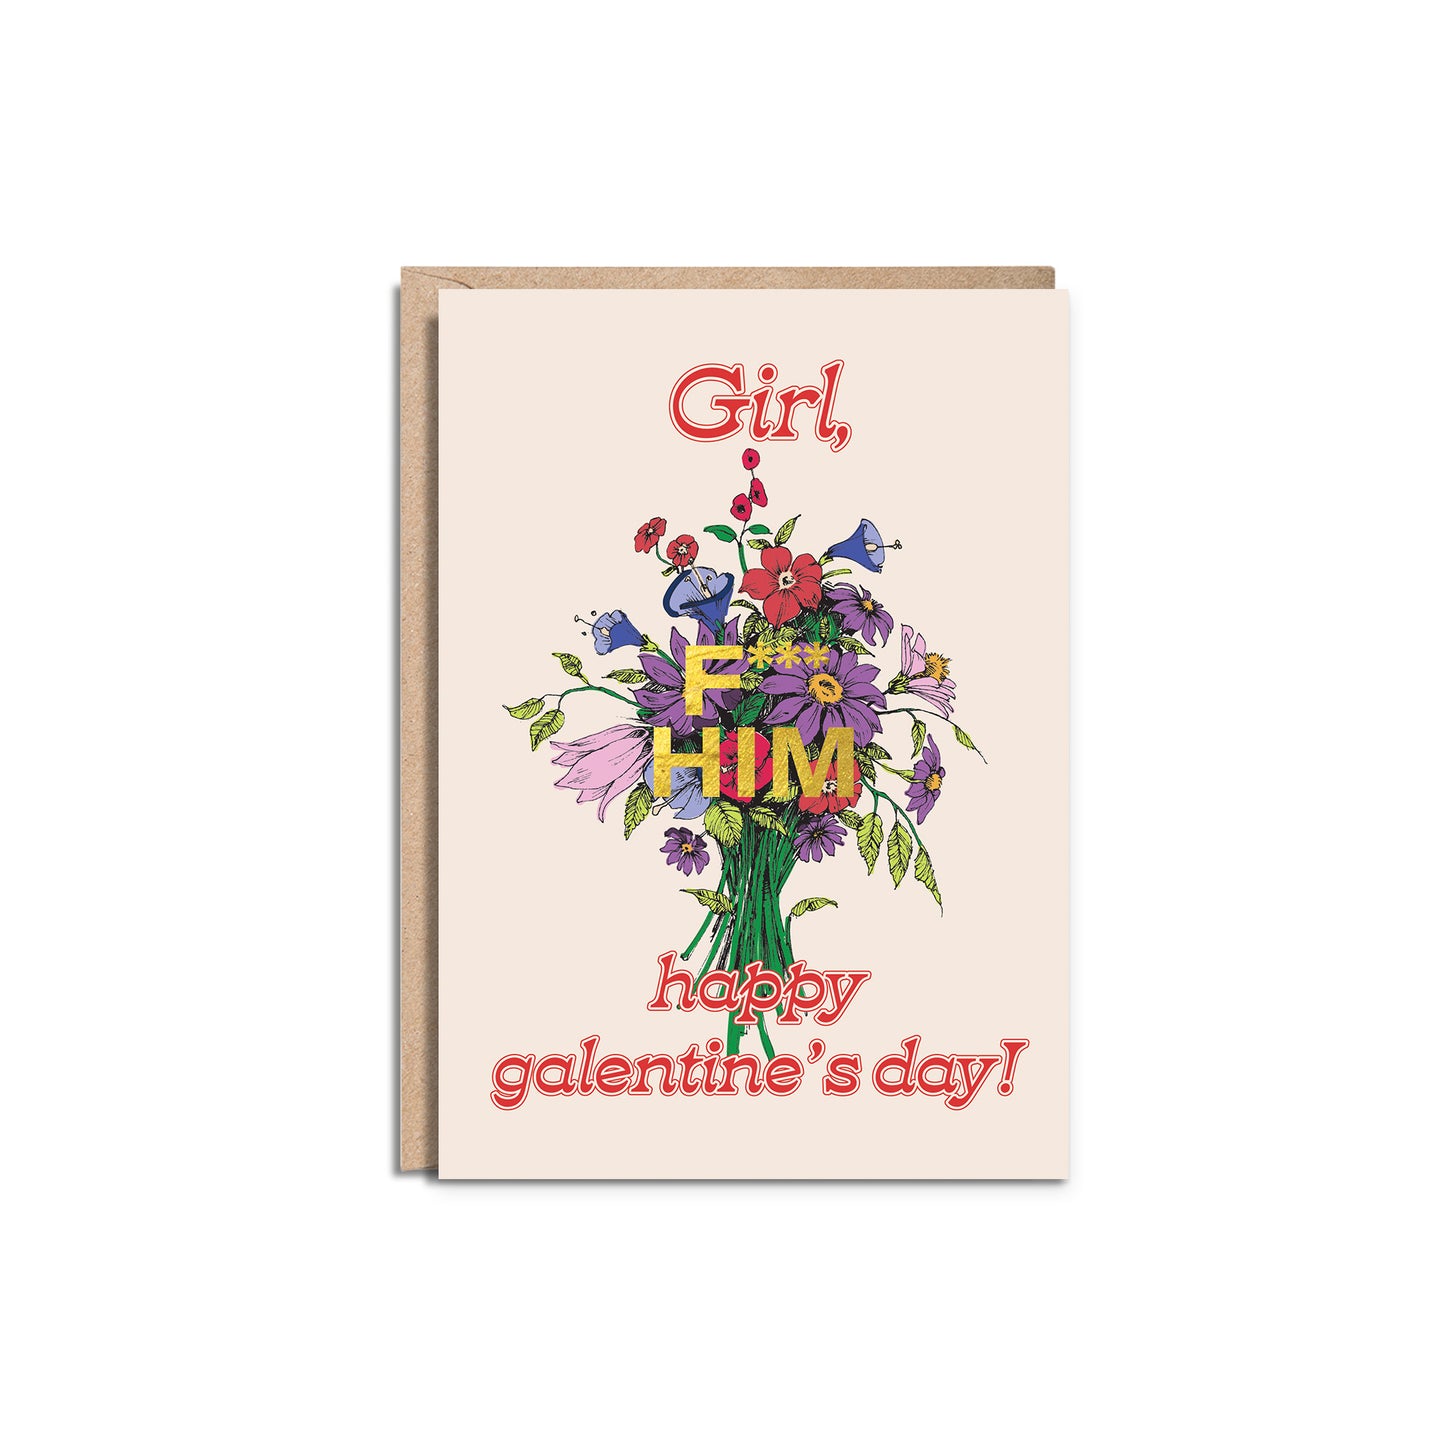 Girl F Him 5x7” Gold Foil Breakup Galentines Day Love Valentines Day greeting card from Goods Made By Digitrillnana, Ashley Fletcher. Perfect card for a friend on valentines day! Black Woman Owned.